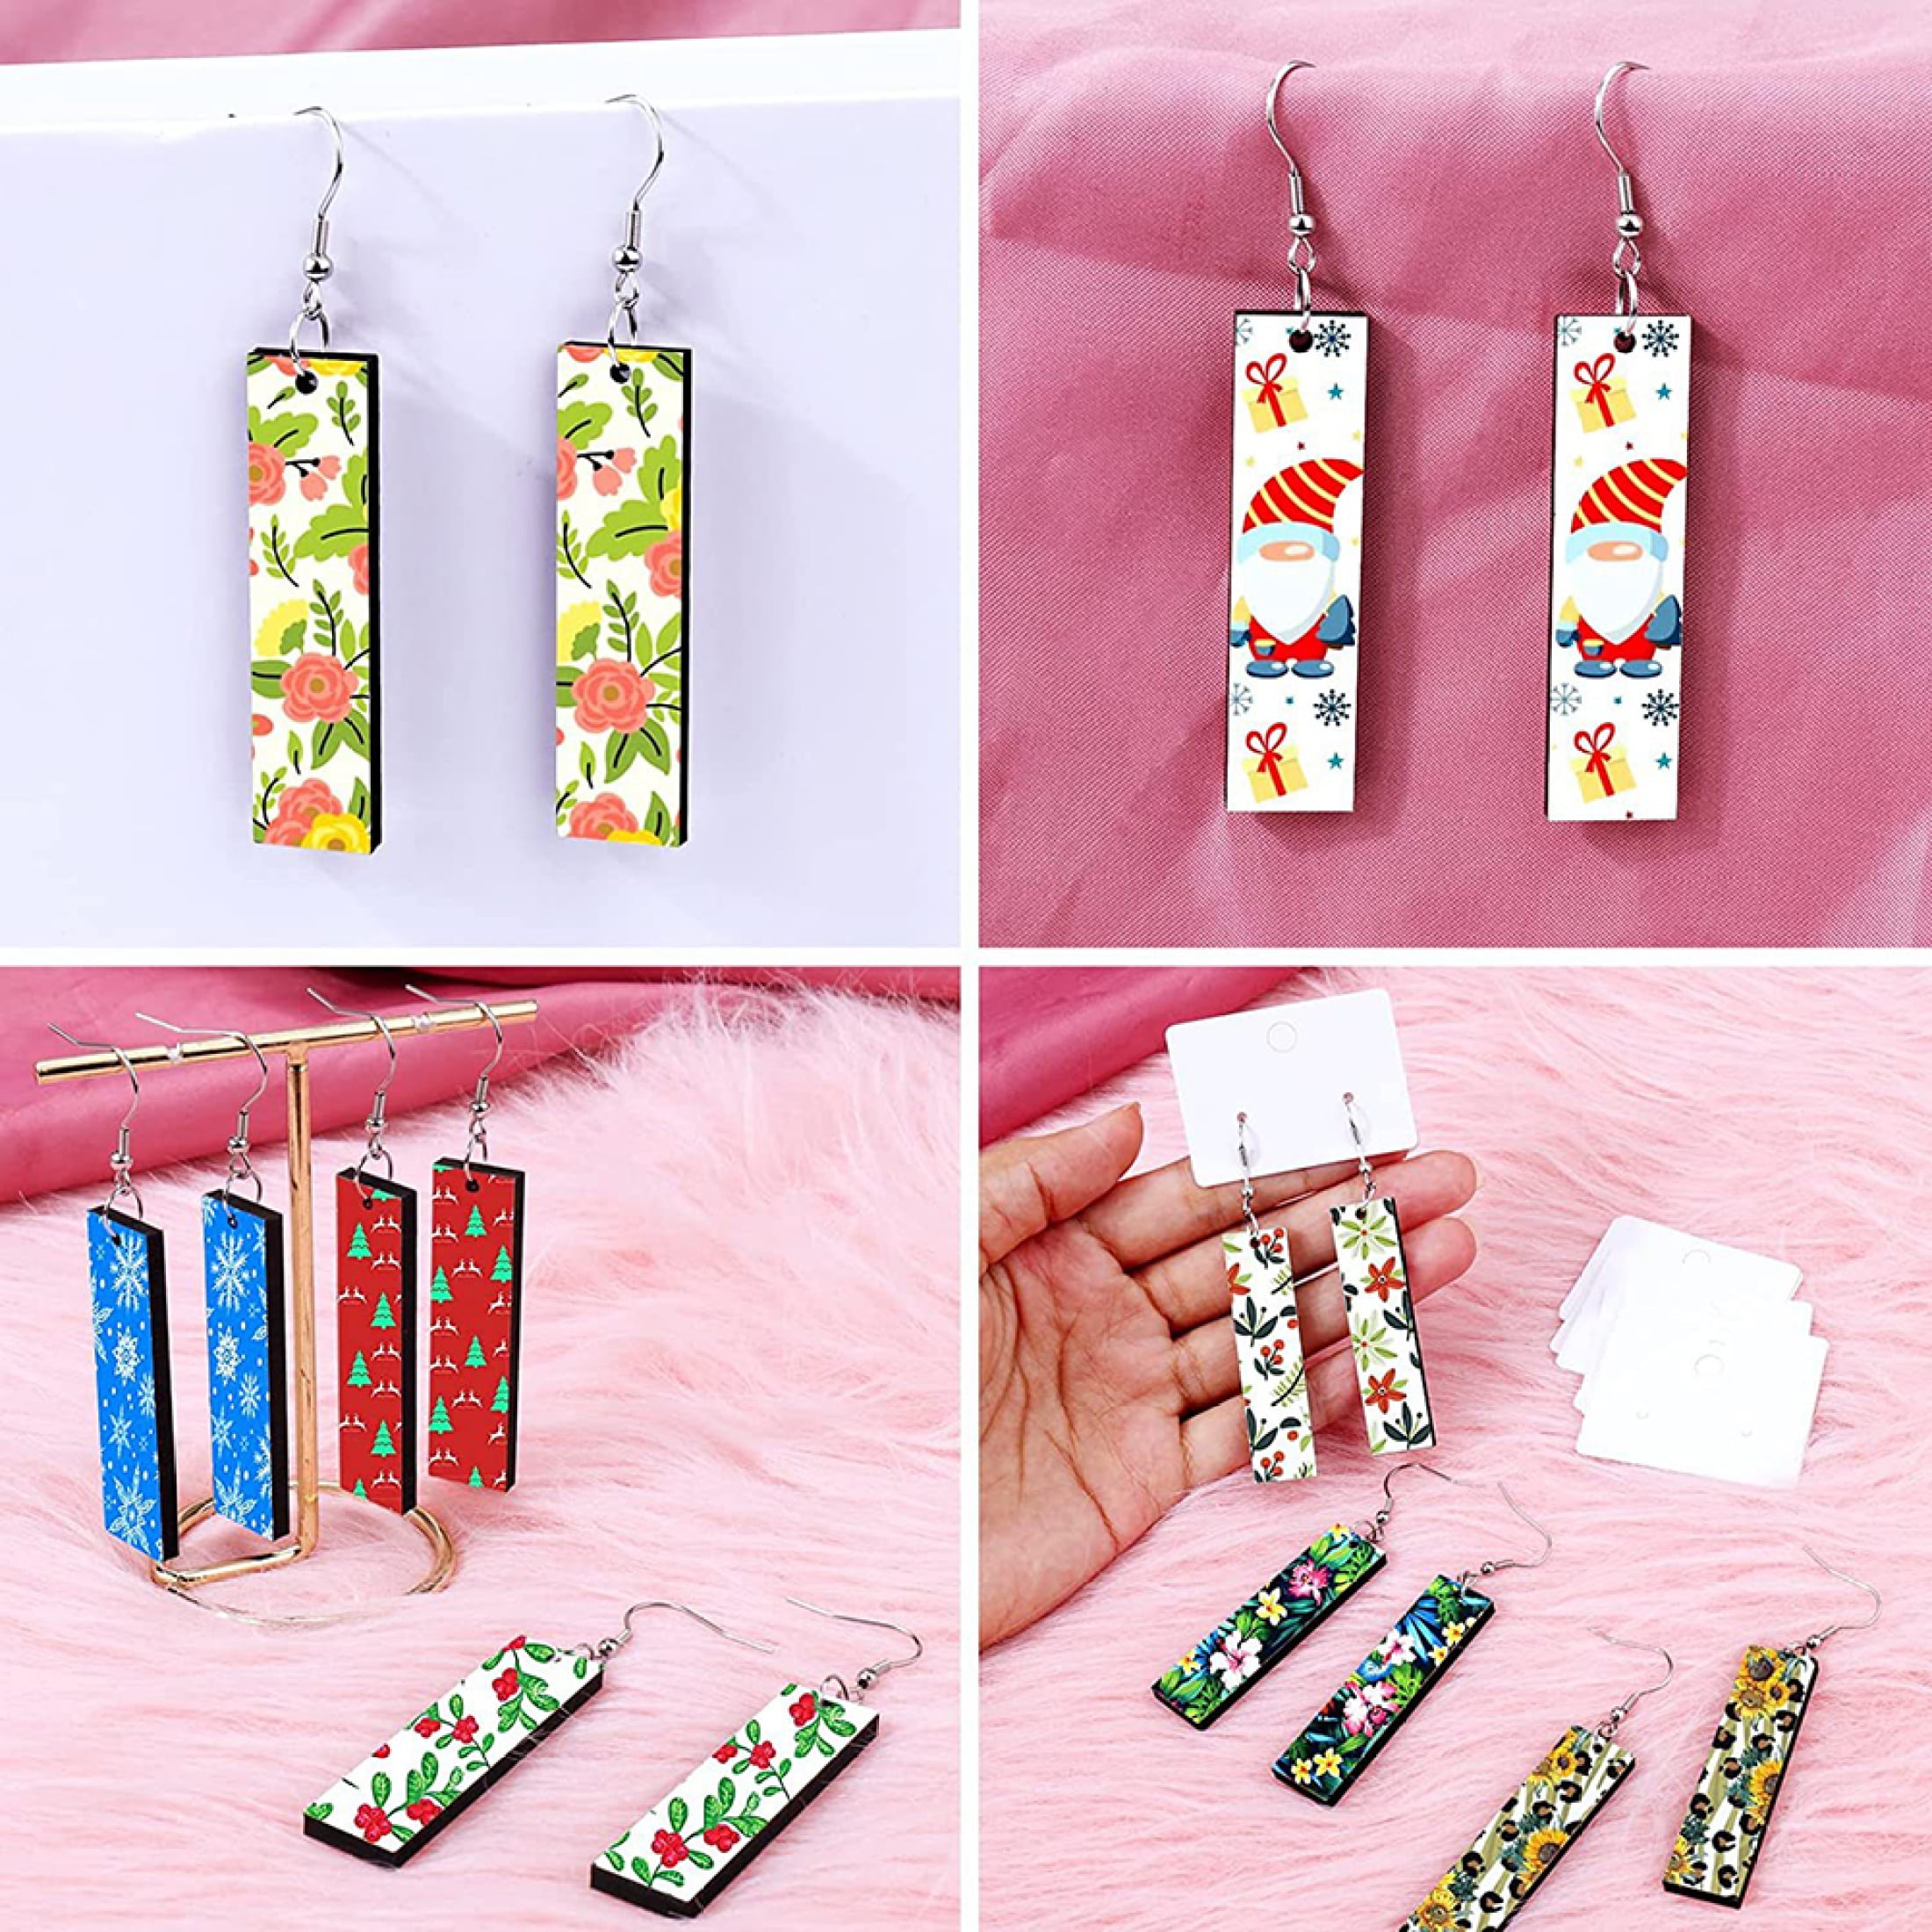 EUBUY 250pcs Sublimation Blank Earrings Set Heat Transfer Earring Ornament  Blanks with Earring Hooks and Jump Rings for Jewelry DIY Making Supplies 